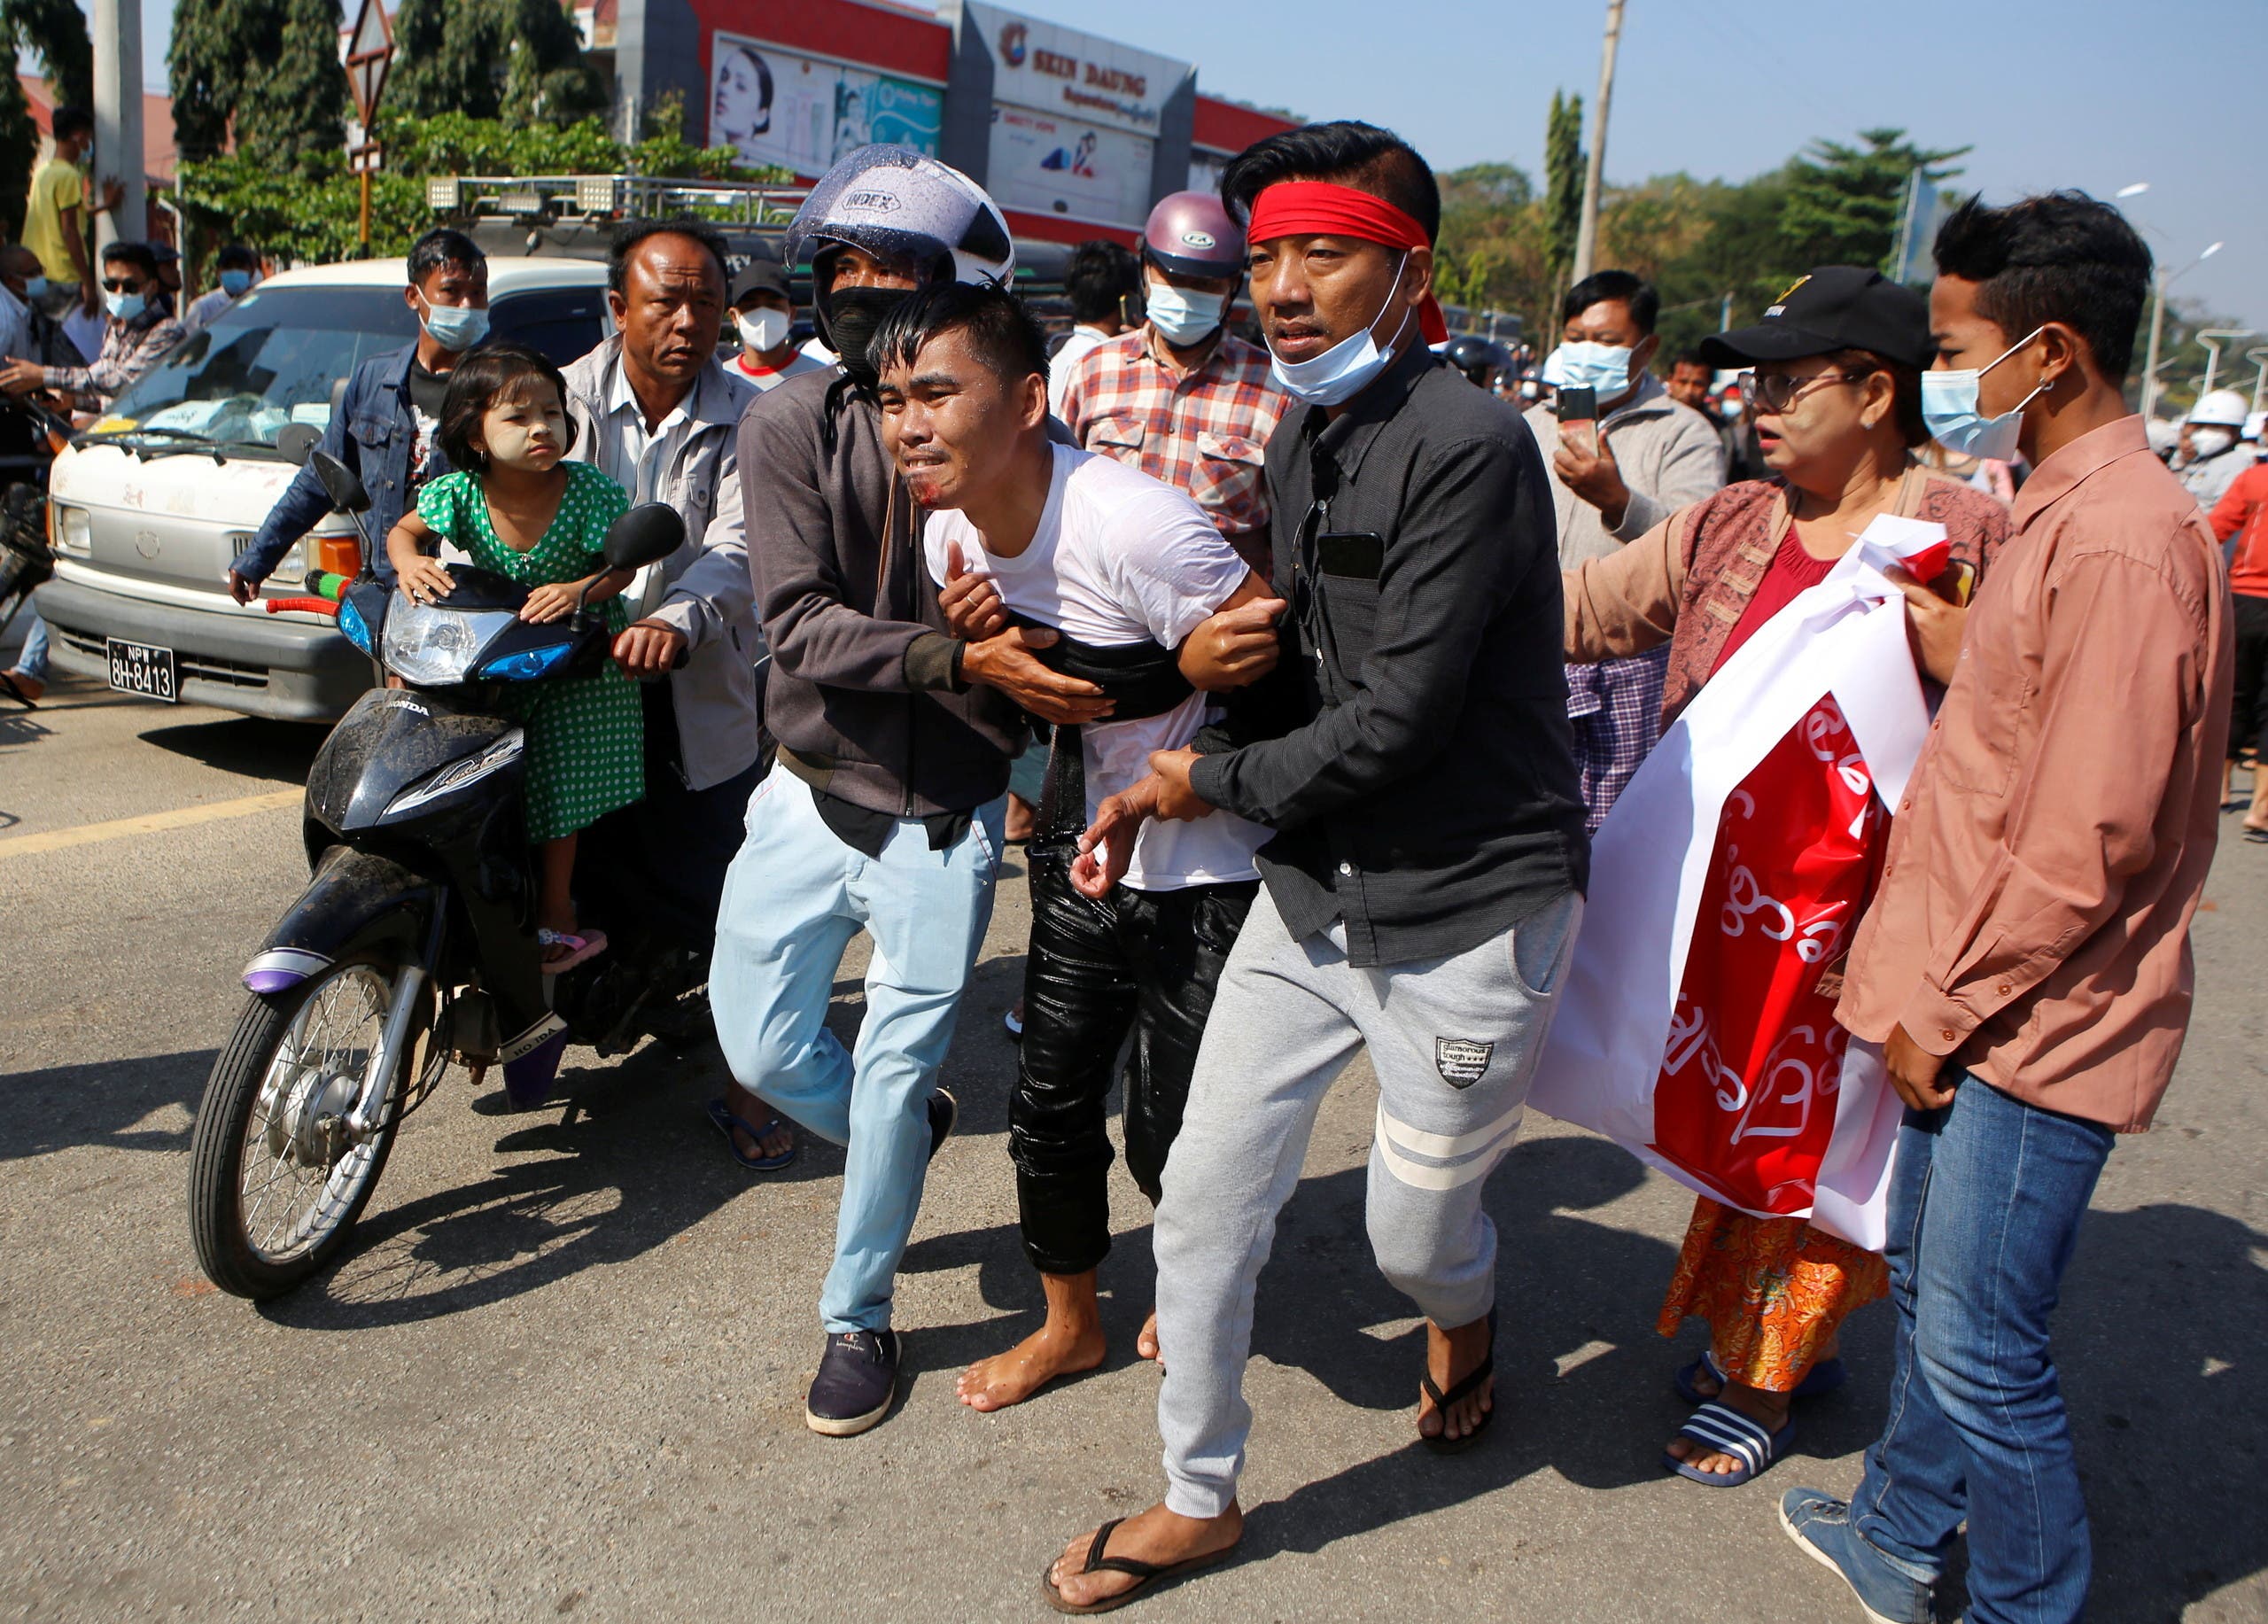 An injured protester is helped by his fellow protesters, at a rally against the military coup and to demand the release of elected leader Aung San Suu Kyi, in Naypyitaw, Myanmar, February 9, 2021. (Reuters)